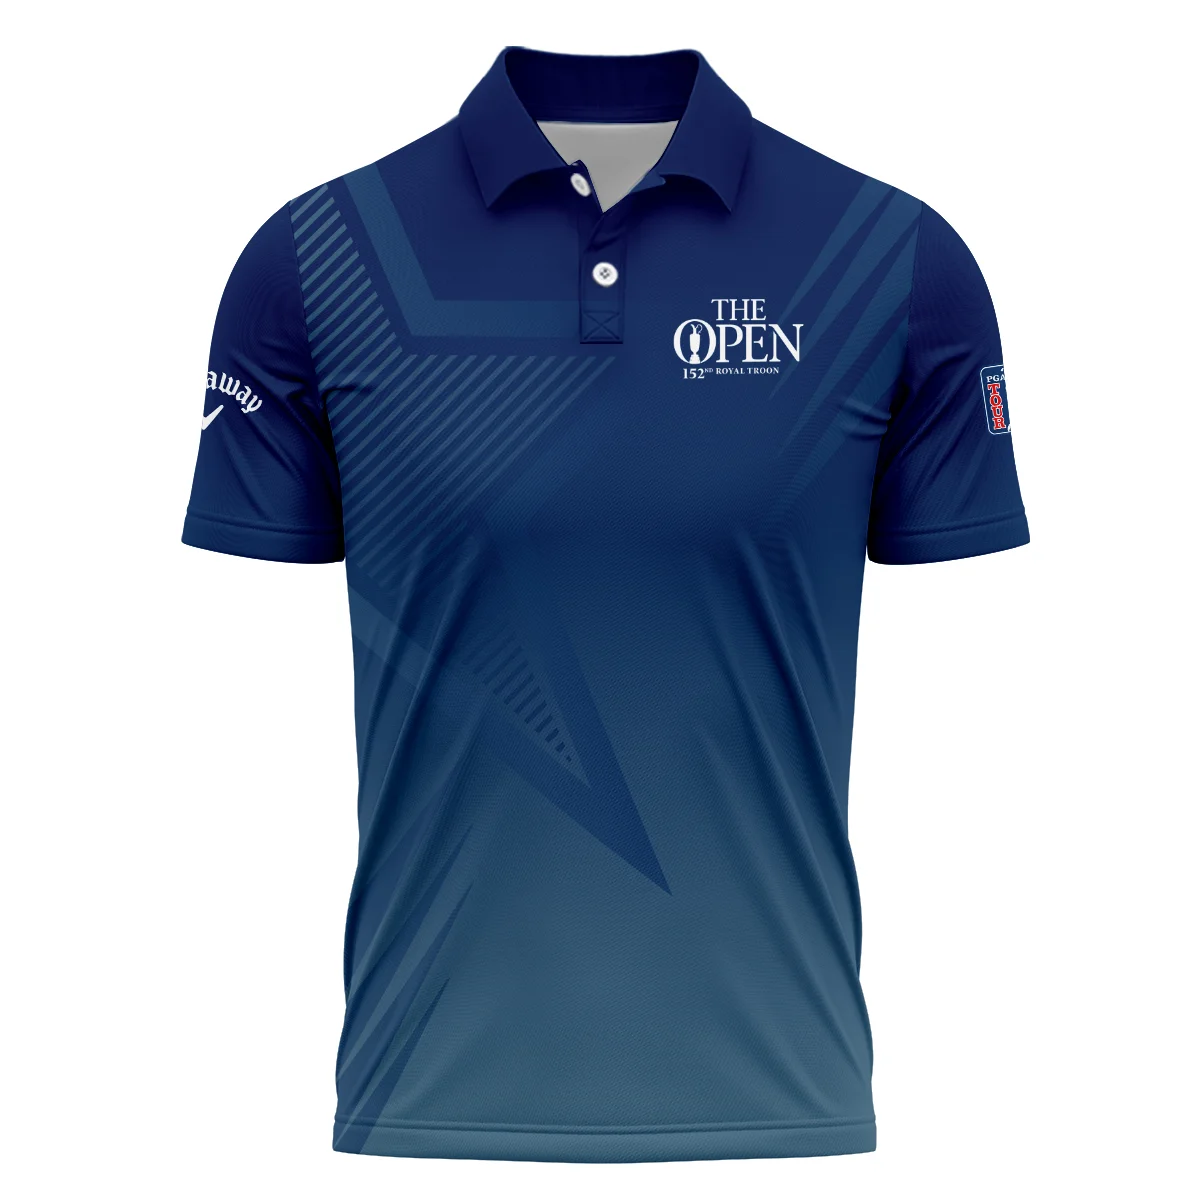 Callaway 152nd Open Championship Abstract Background Dark Blue Gradient Star Line Performance T-Shirt All Over Prints HOTOP260624A04CLWTS